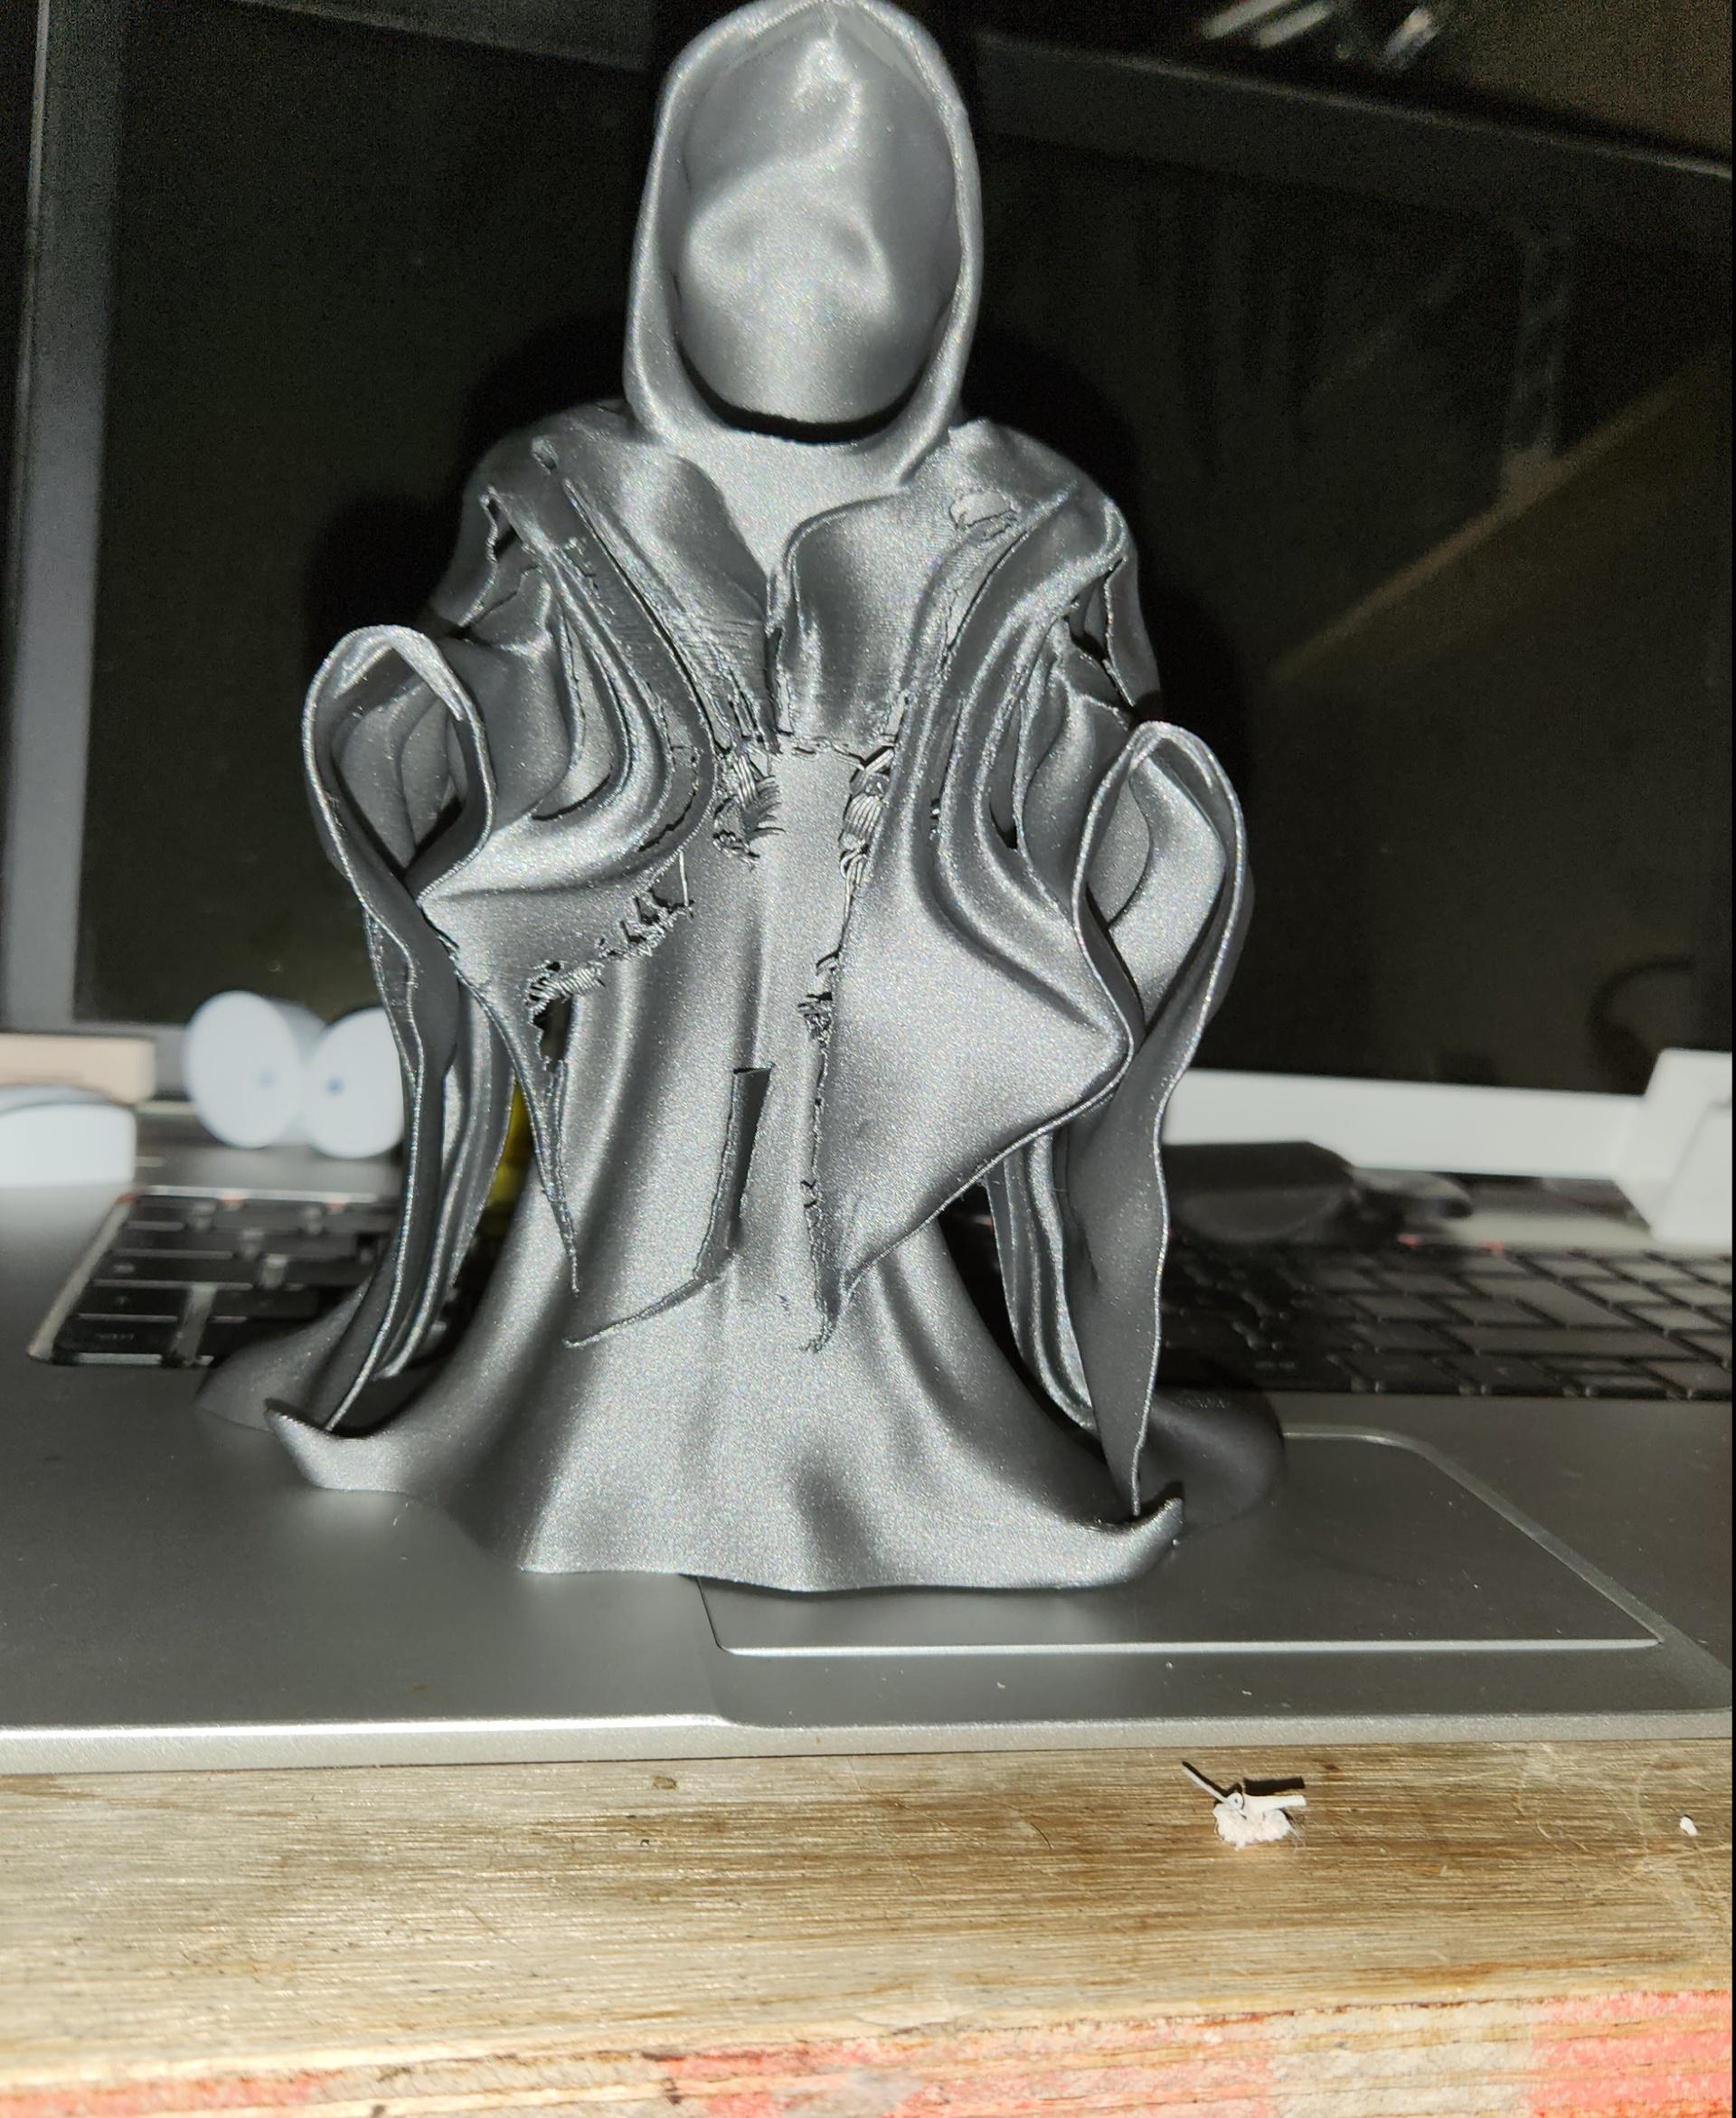 Grim Reaper, Slim Reaper - Articulated Snap-Flex Fidget (Medium Tightness Joints) - I should have read the comments about the front, but not so bad after all :)
print with x1 carbon at 0.2 in 4h30 - 3d model